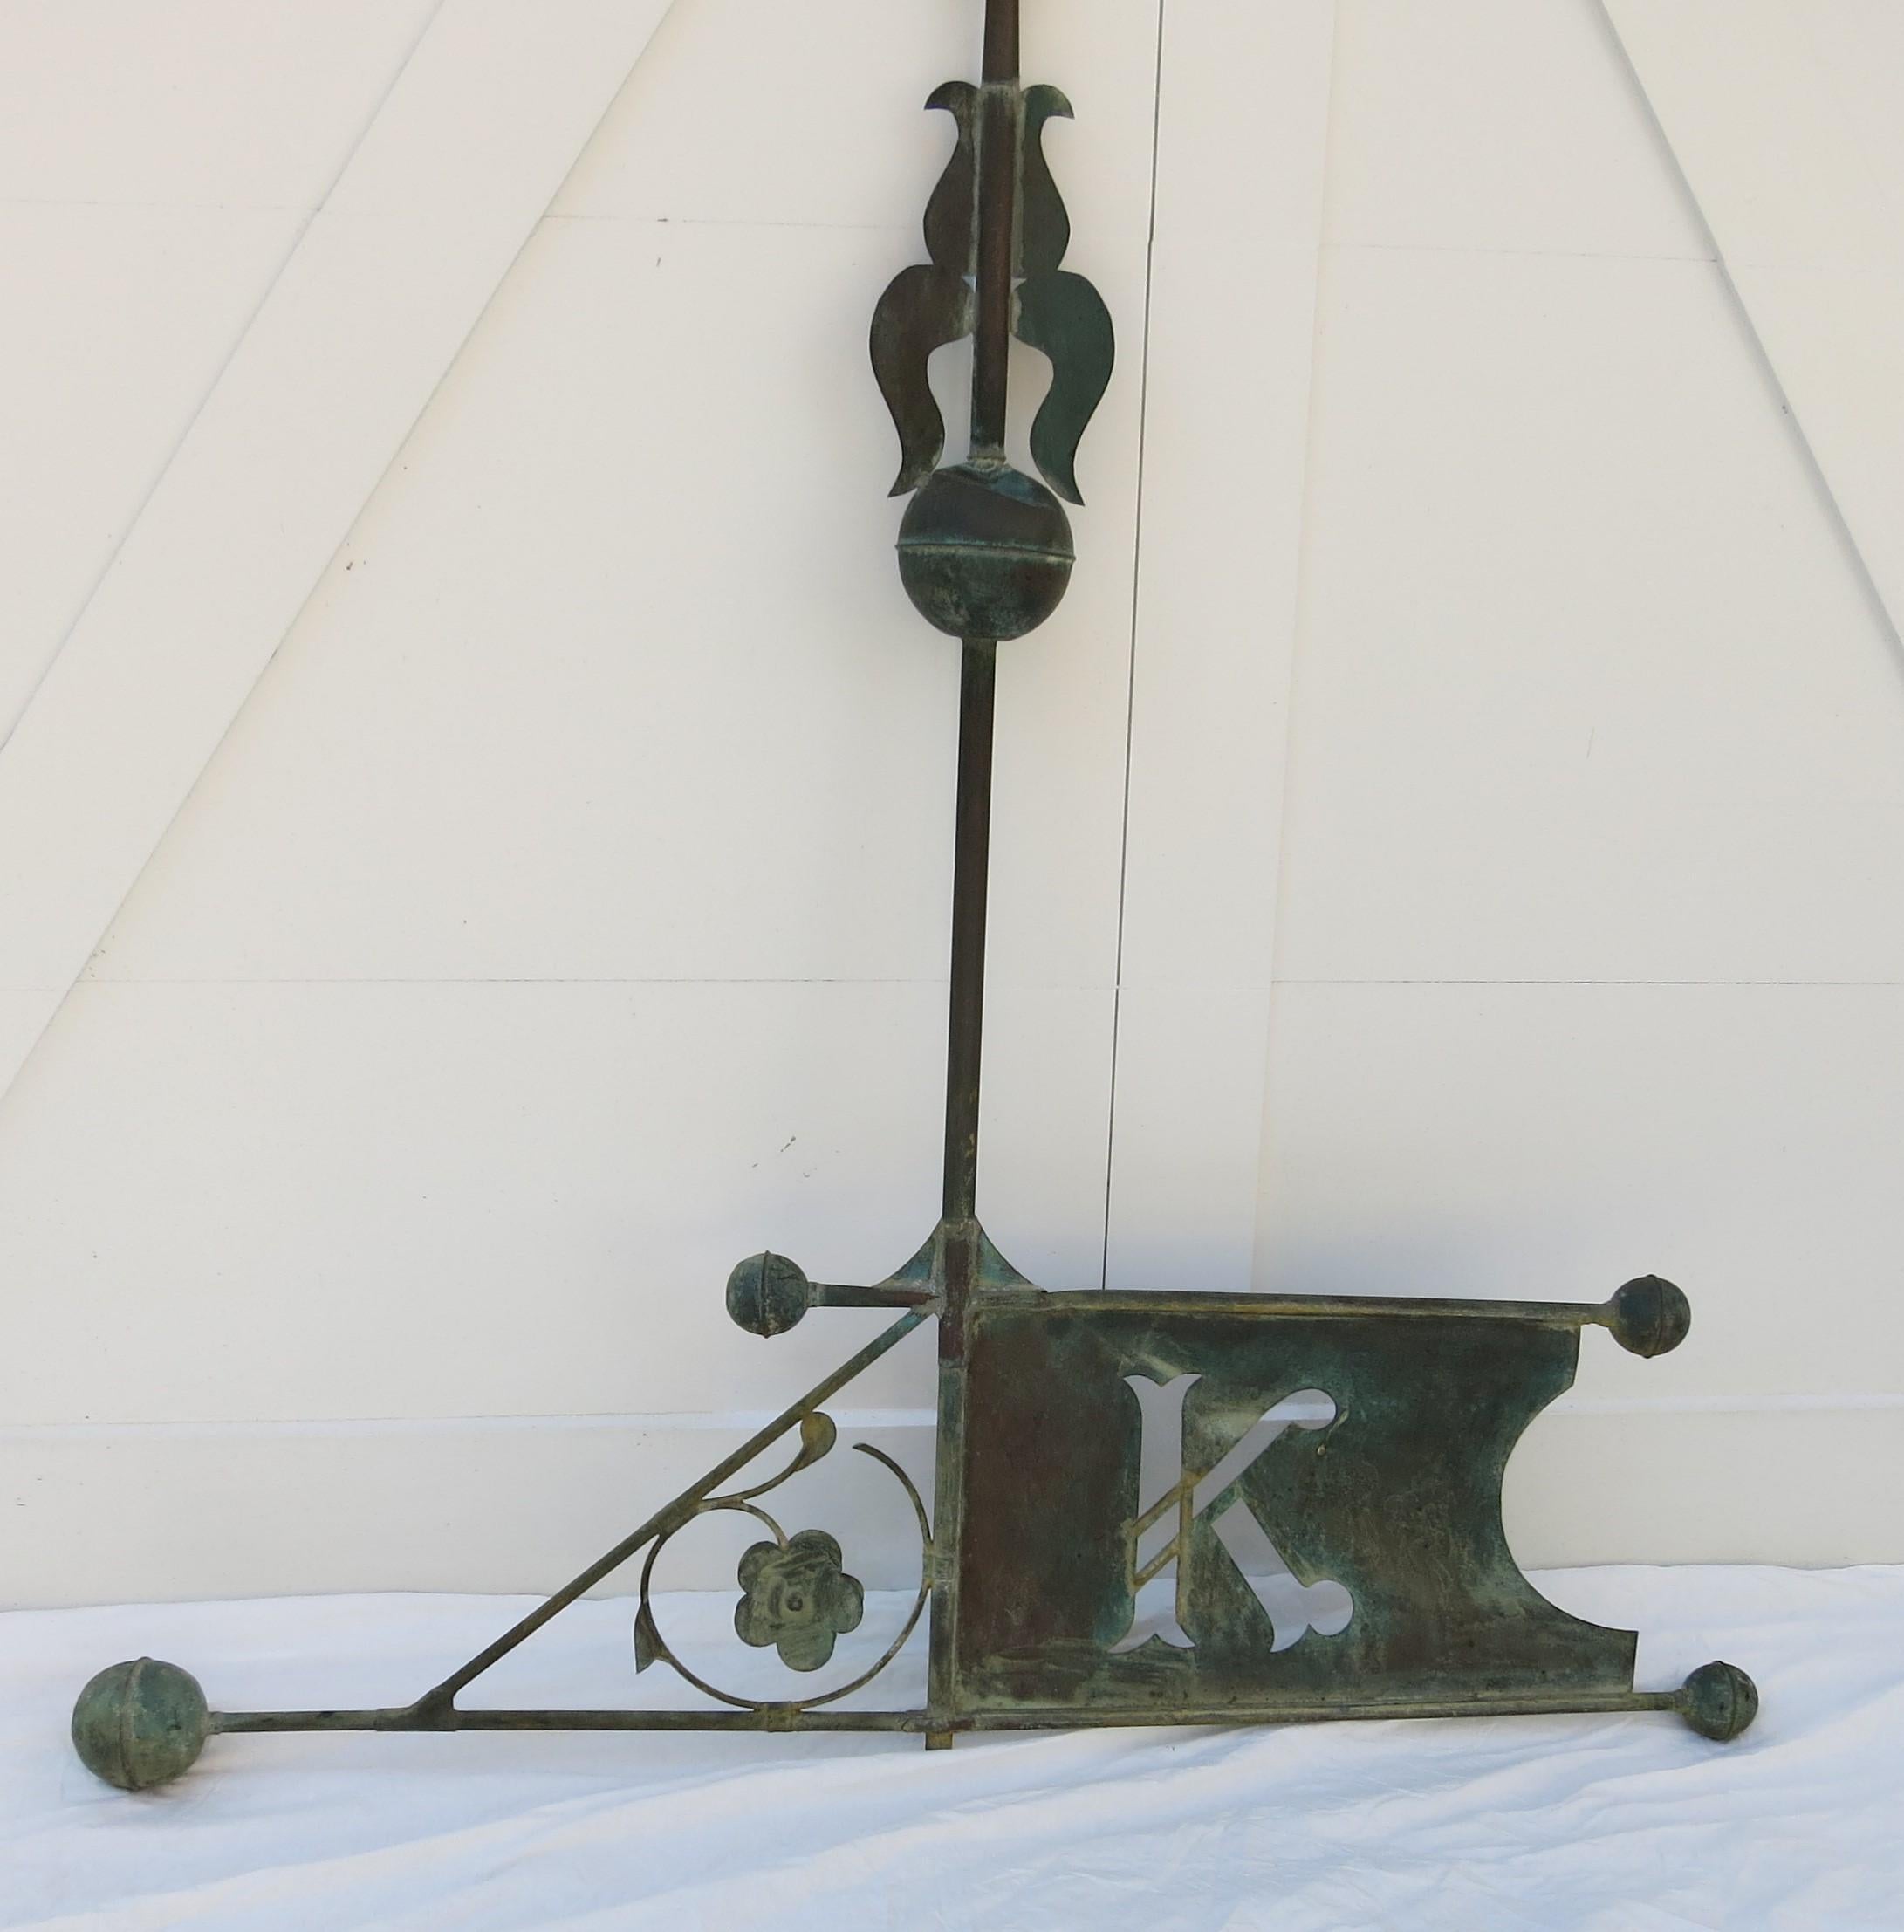 Large size and beautiful patina, this letter K bannerette weathervane comes from the Boston Massachusetts area. It is 66' high and 55' wide. There is a break to the top point held together by a dowel. One crease to the top ball and expected wear and